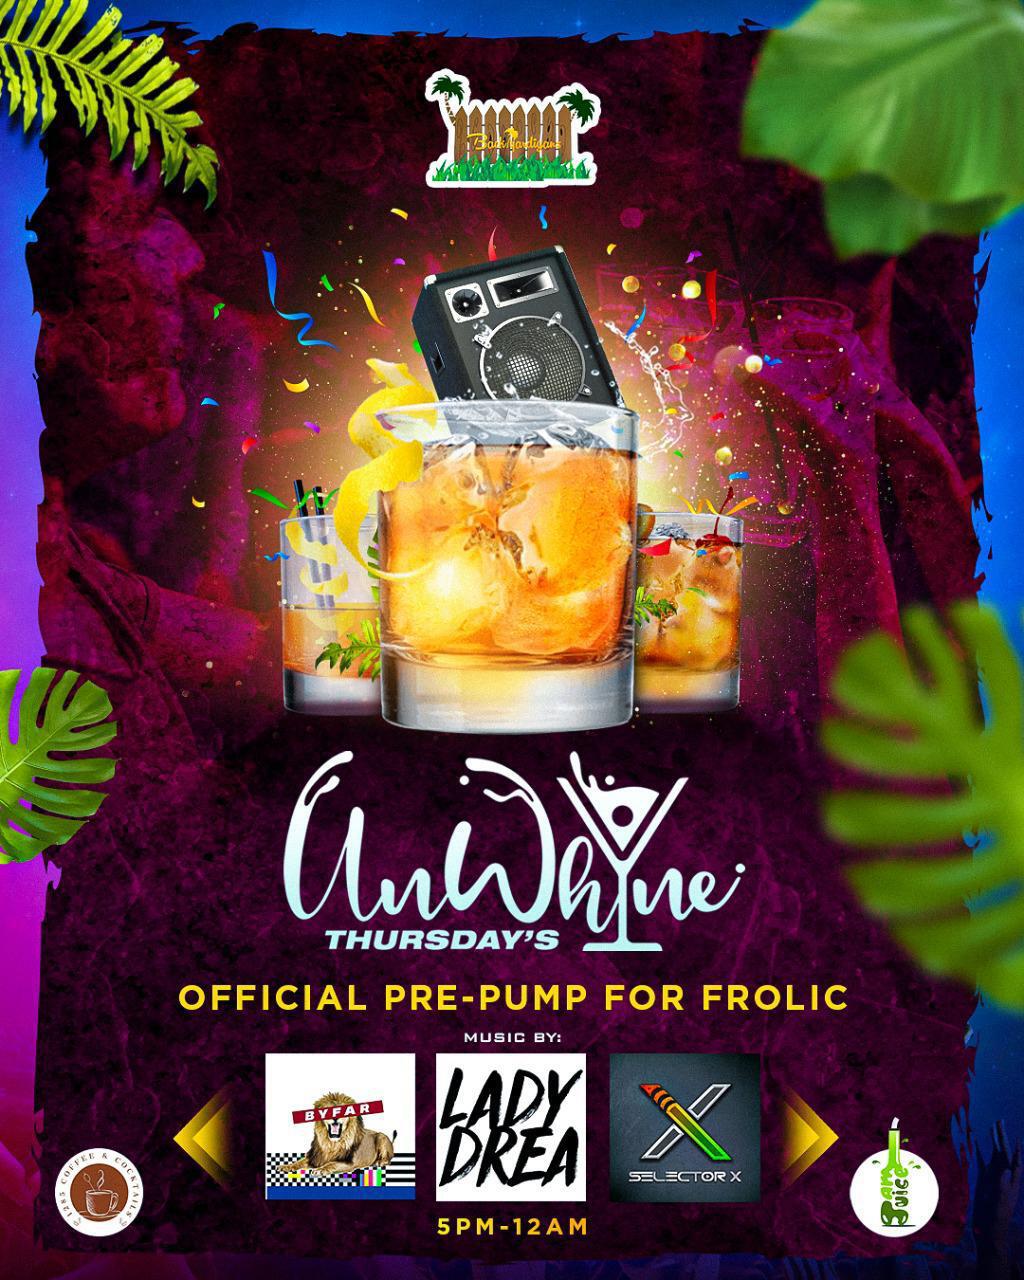 Unwhine Thursdays flyer or graphic.